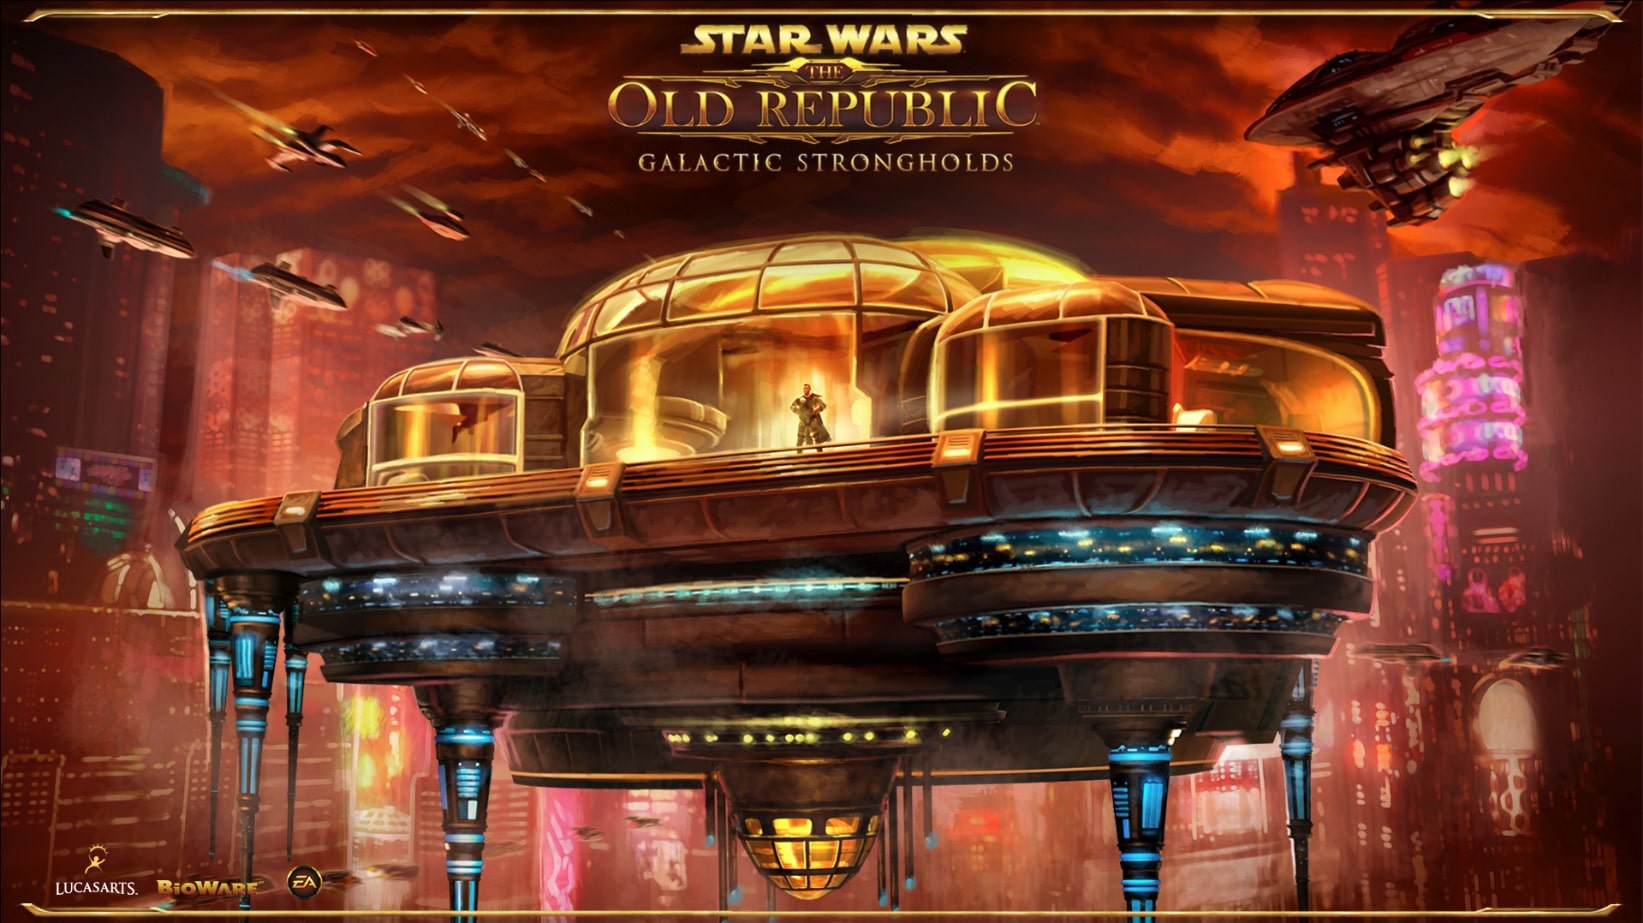 Galactic Strongholds loading screen